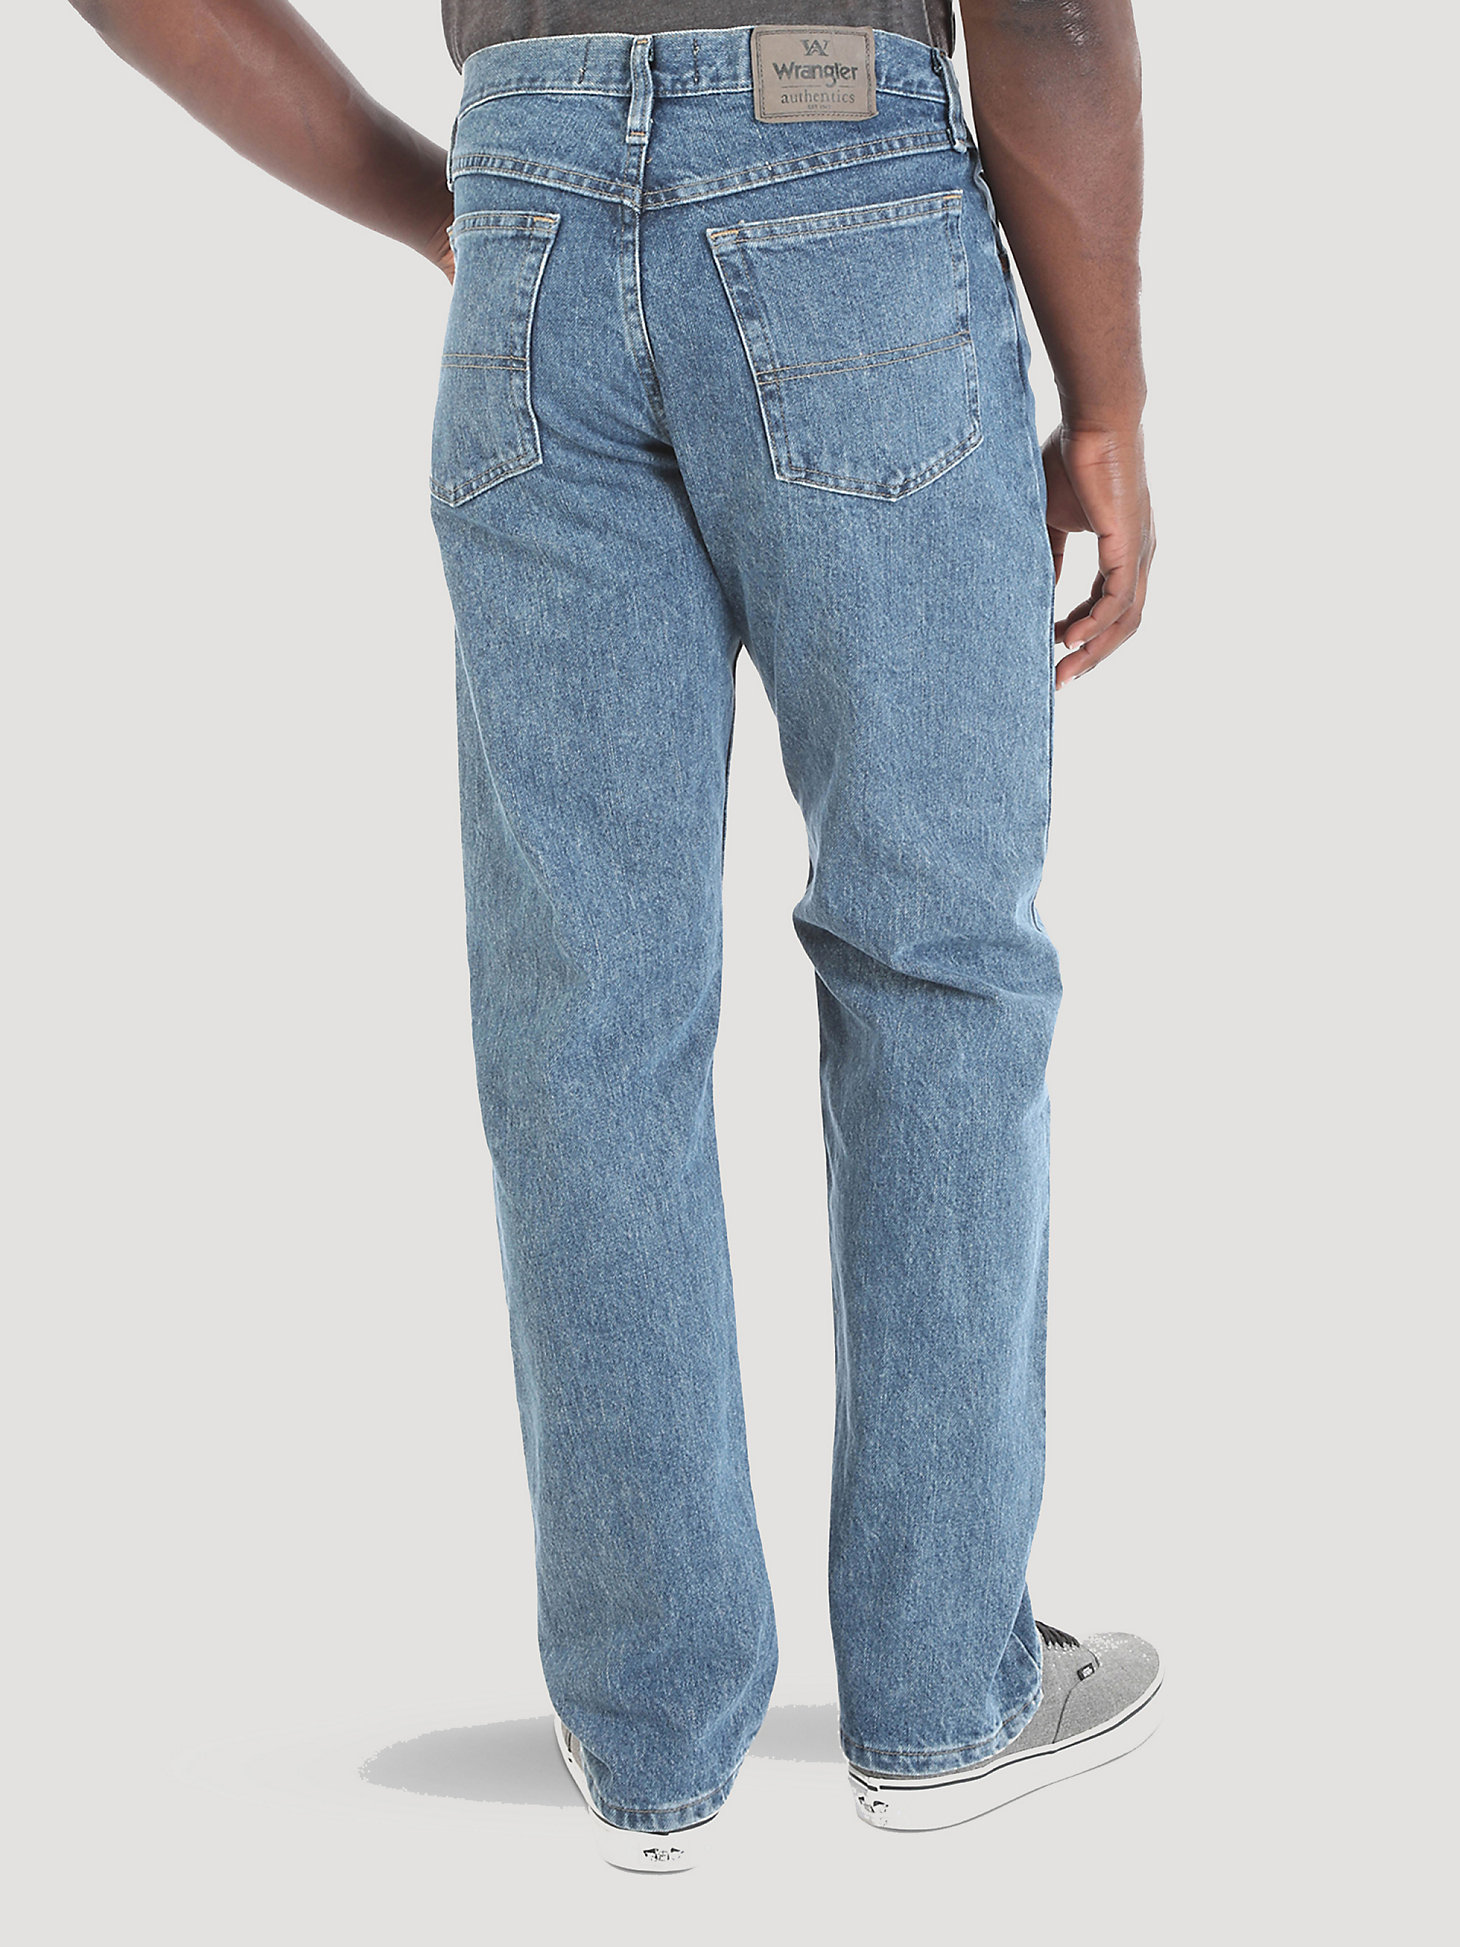 Wrangler Mens Authentics Big & Tall Classic Relaxed Fit Jean